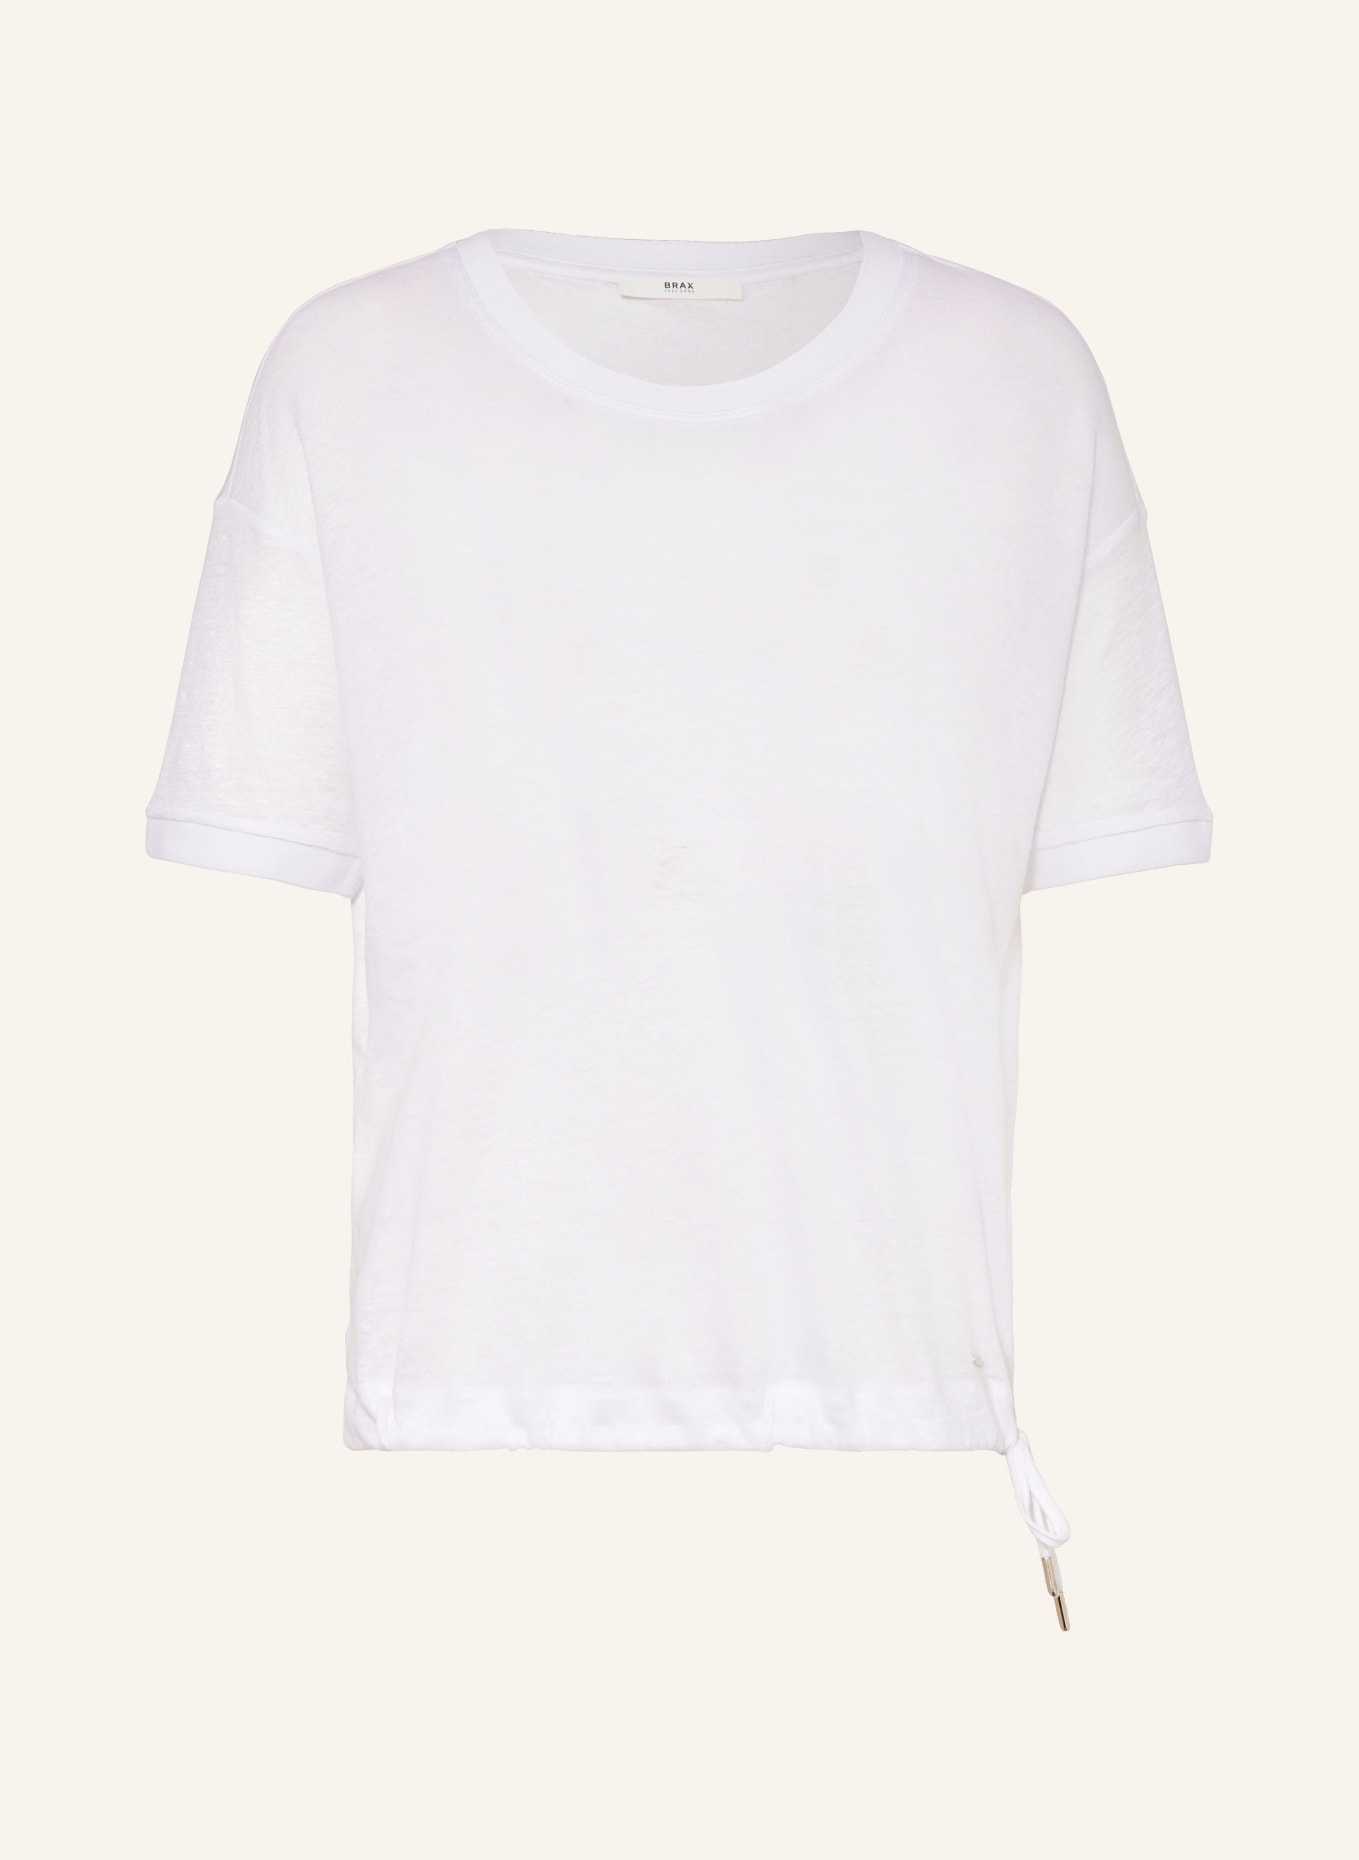 BRAX T-shirt CANDICE made of linen, Color: WHITE (Image 1)